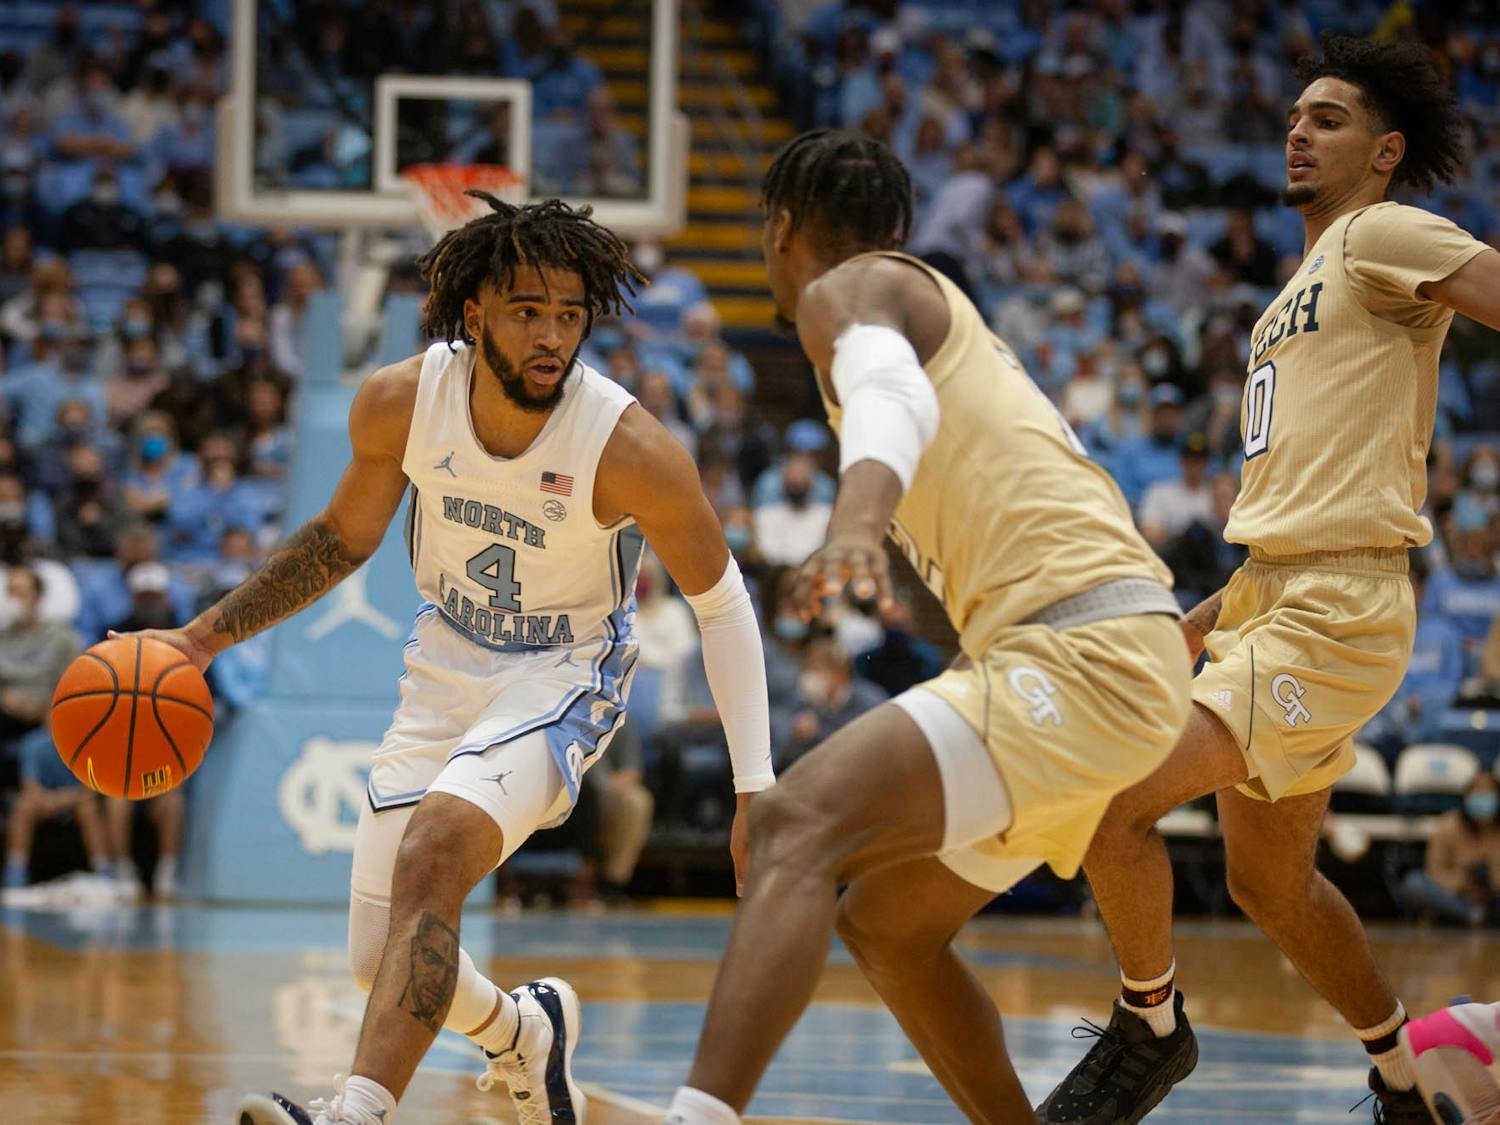 Sophomore RJ Davis (4) dribbles the ball at the game against Georgia Tech at the Dean Smith Center in Chapel Hill on Saturday, Jan. 15, 2022. UNC won 88-65.